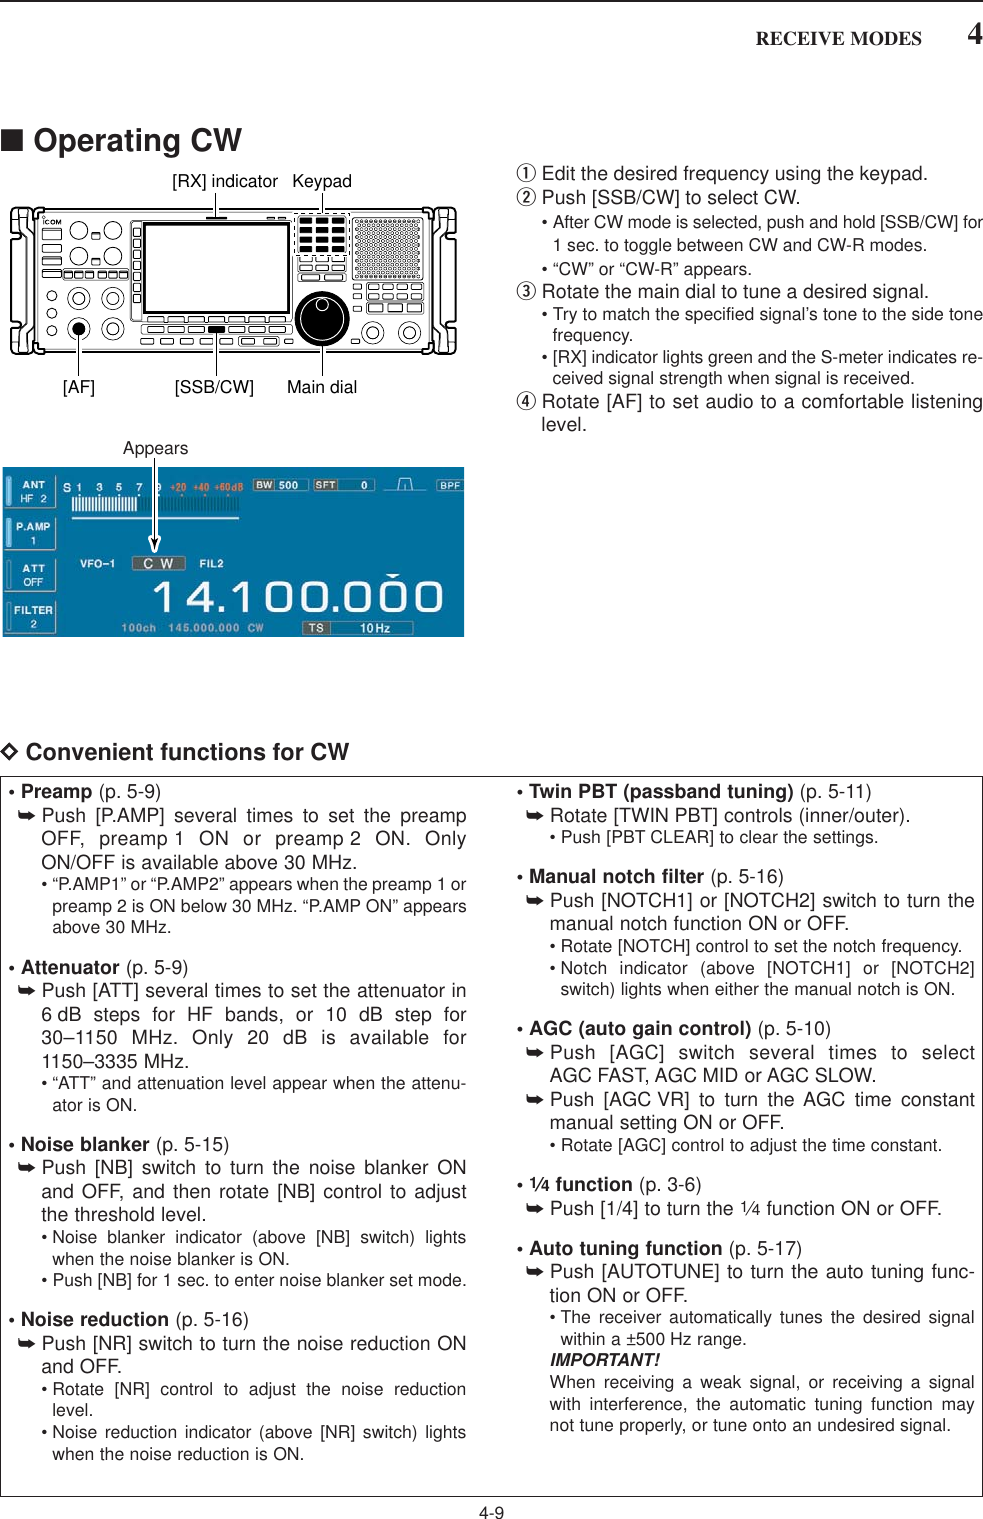 4-94RECEIVE MODES■Operating CWqEdit the desired frequency using the keypad.wPush [SSB/CW] to select CW.• After CW mode is selected, push and hold [SSB/CW] for1 sec. to toggle between CW and CW-R modes.• “CW” or “CW-R” appears.eRotate the main dial to tune a desired signal.• Try to match the specified signal’s tone to the side tonefrequency.• [RX] indicator lights green and the S-meter indicates re-ceived signal strength when signal is received.rRotate [AF] to set audio to a comfortable listeninglevel.DConvenient functions for CWAppearsKeypad[RX] indicator[AF] [SSB/CW] Main dial• Preamp (p. 5-9)➥Push [P.AMP] several times to set the preampOFF, preamp 1 ON or preamp 2 ON. OnlyON/OFF is available above 30 MHz.• “P.AMP1” or “P.AMP2” appears when the preamp 1 orpreamp 2 is ON below 30 MHz. “P.AMP ON” appearsabove 30 MHz.• Attenuator (p. 5-9)➥Push [ATT] several times to set the attenuator in6 dB steps for HF bands, or 10 dB step for30–1150 MHz. Only 20 dB is available for1150–3335 MHz.• “ATT” and attenuation level appear when the attenu-ator is ON.• Noise blanker (p. 5-15)➥Push [NB] switch to turn the noise blanker ONand OFF, and then rotate [NB] control to adjustthe threshold level.• Noise blanker indicator (above [NB] switch) lightswhen the noise blanker is ON.• Push [NB] for 1 sec. to enter noise blanker set mode.• Noise reduction (p. 5-16)➥Push [NR] switch to turn the noise reduction ONand OFF.• Rotate [NR] control to adjust the noise reductionlevel.• Noise reduction indicator (above [NR] switch) lightswhen the noise reduction is ON.• Twin PBT (passband tuning) (p. 5-11)➥Rotate [TWIN PBT] controls (inner/outer).• Push [PBT CLEAR] to clear the settings.• Manual notch filter (p. 5-16)➥Push [NOTCH1] or [NOTCH2] switch to turn themanual notch function ON or OFF.• Rotate [NOTCH] control to set the notch frequency.• Notch indicator (above [NOTCH1] or [NOTCH2]switch) lights when either the manual notch is ON.• AGC (auto gain control) (p. 5-10)➥Push [AGC] switch several times to selectAGC FAST, AGC MID or AGC SLOW.➥Push [AGC VR] to turn the AGC time constantmanual setting ON or OFF.• Rotate [AGC] control to adjust the time constant.•1⁄4function (p. 3-6)➥Push [1/4] to turn the 1⁄4function ON or OFF.• Auto tuning function (p. 5-17)➥Push [AUTOTUNE] to turn the auto tuning func-tion ON or OFF.• The receiver automatically tunes the desired signalwithin a ±500 Hz range.IMPORTANT!When receiving a weak signal, or receiving a signalwith interference, the automatic tuning function maynot tune properly, or tune onto an undesired signal.